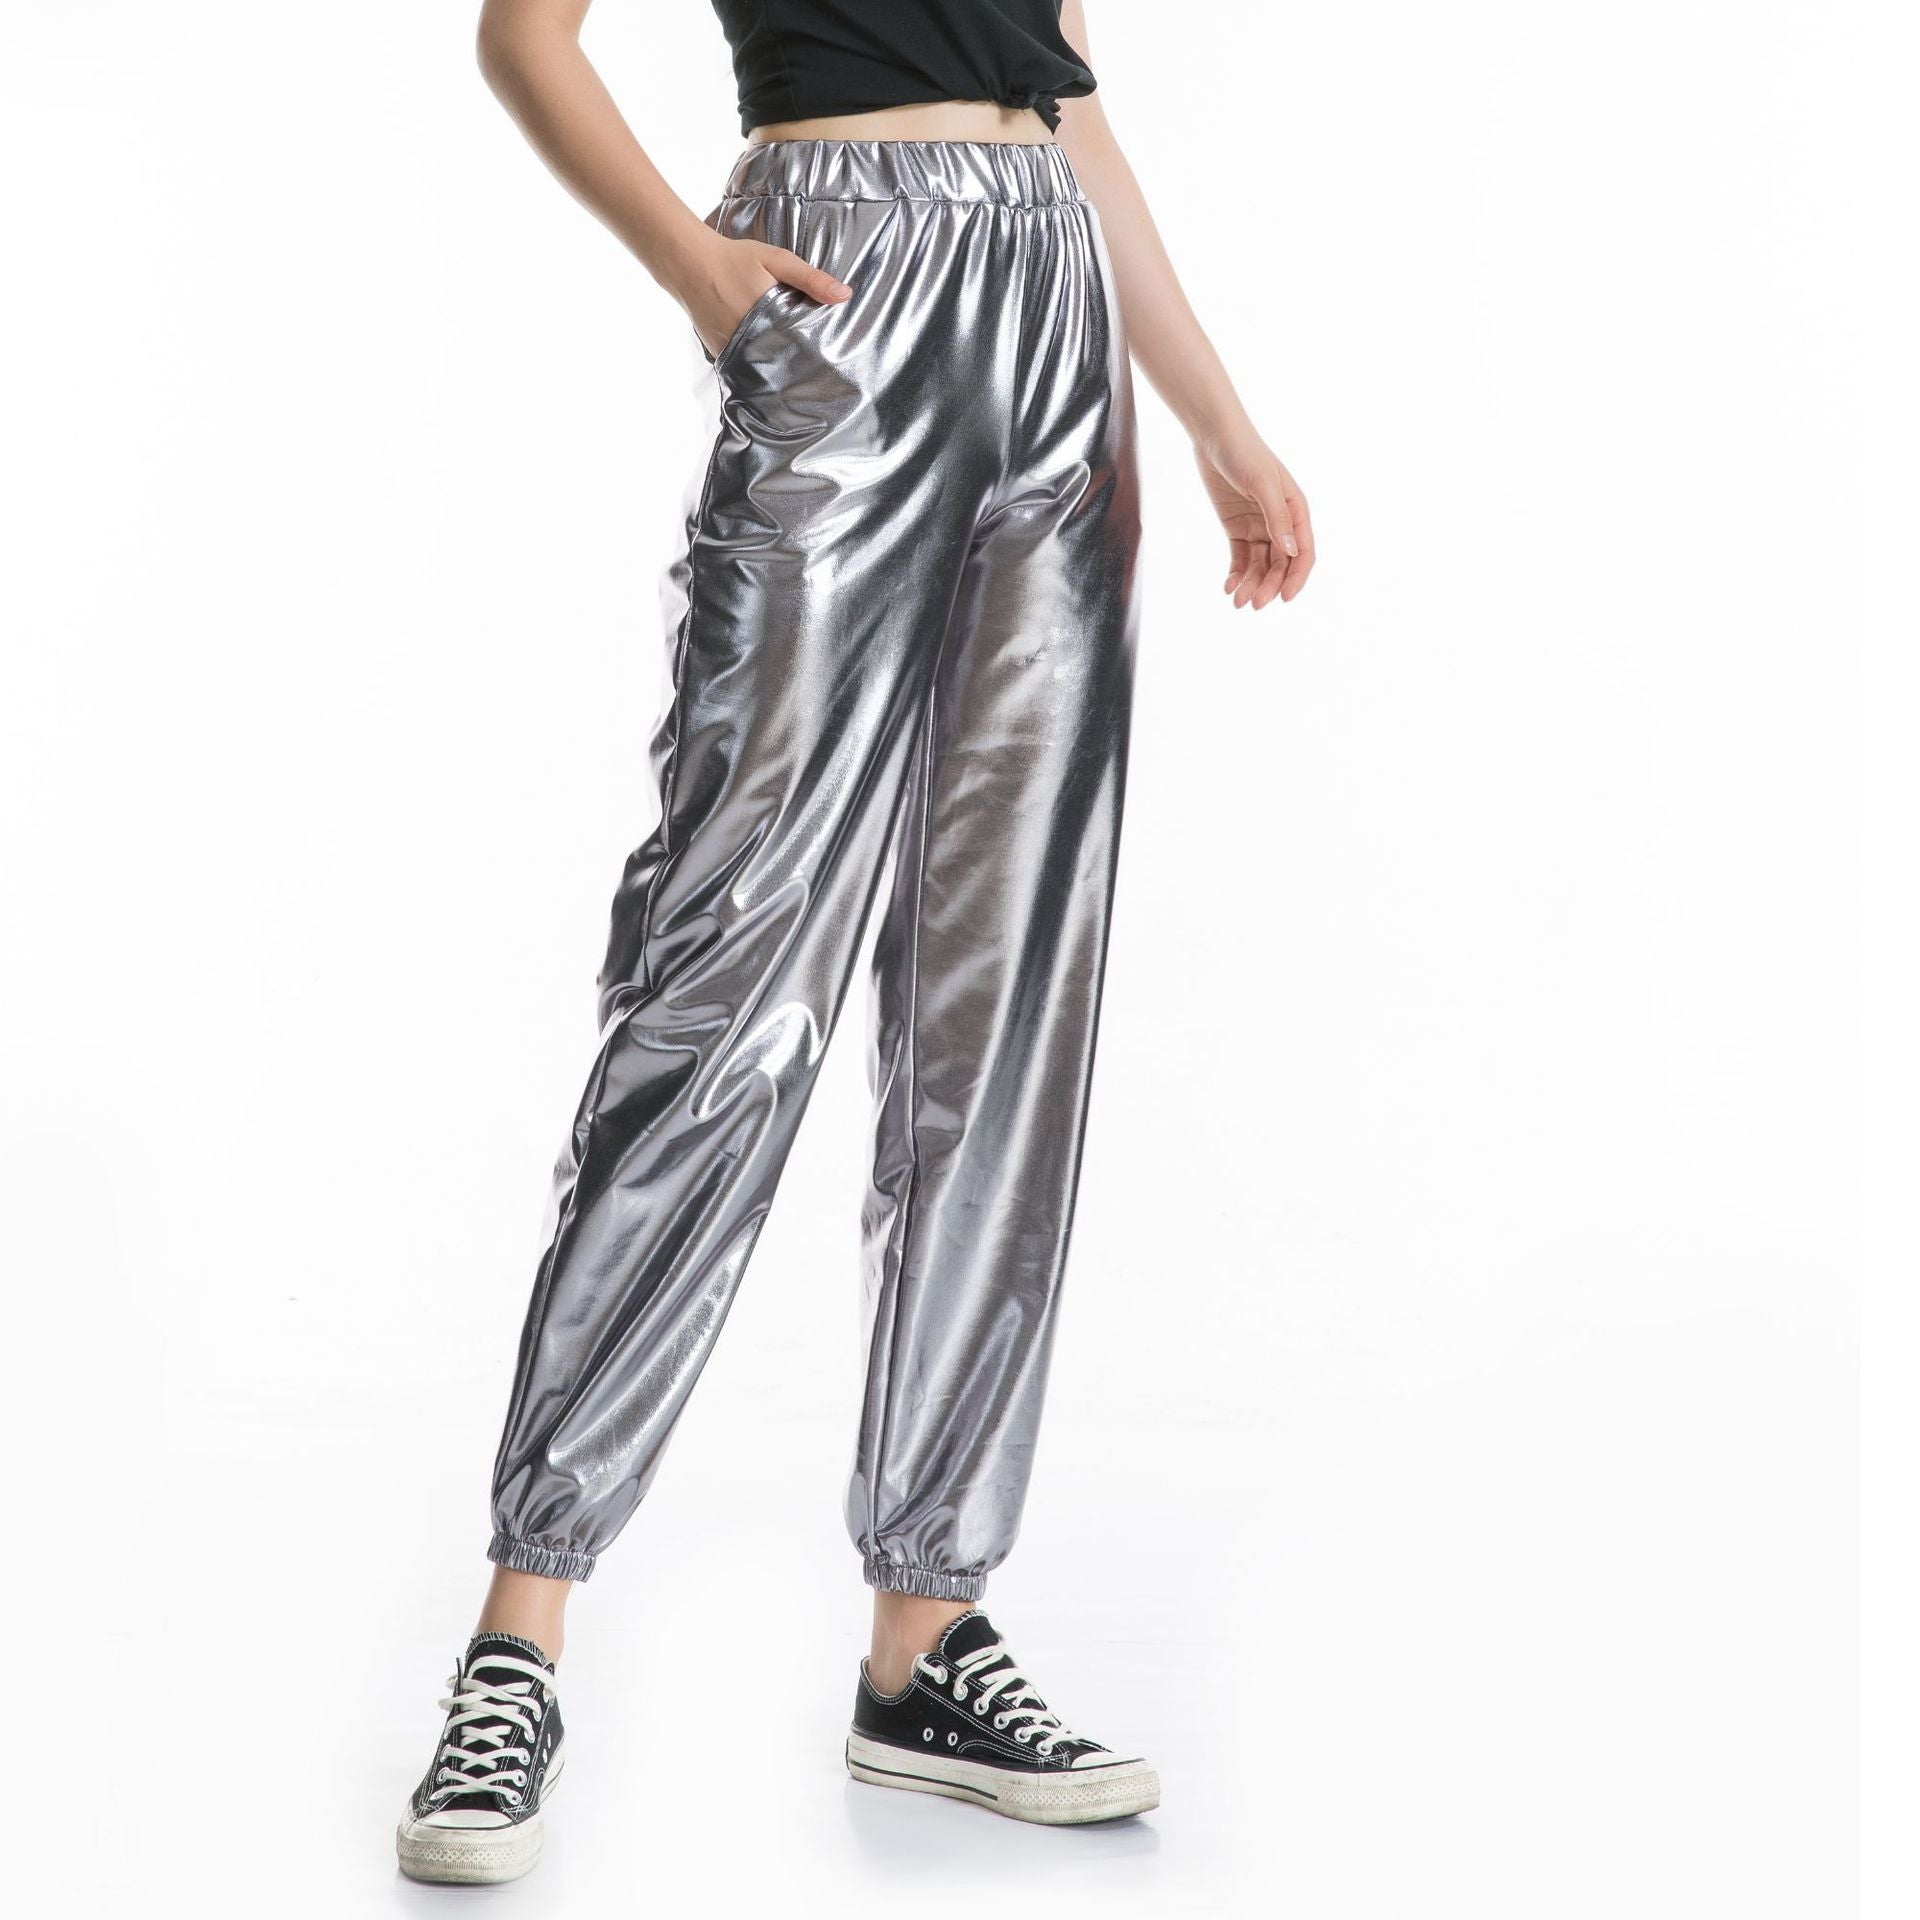 Women's Street Hip Party Shiny Colorful Trousers Pants